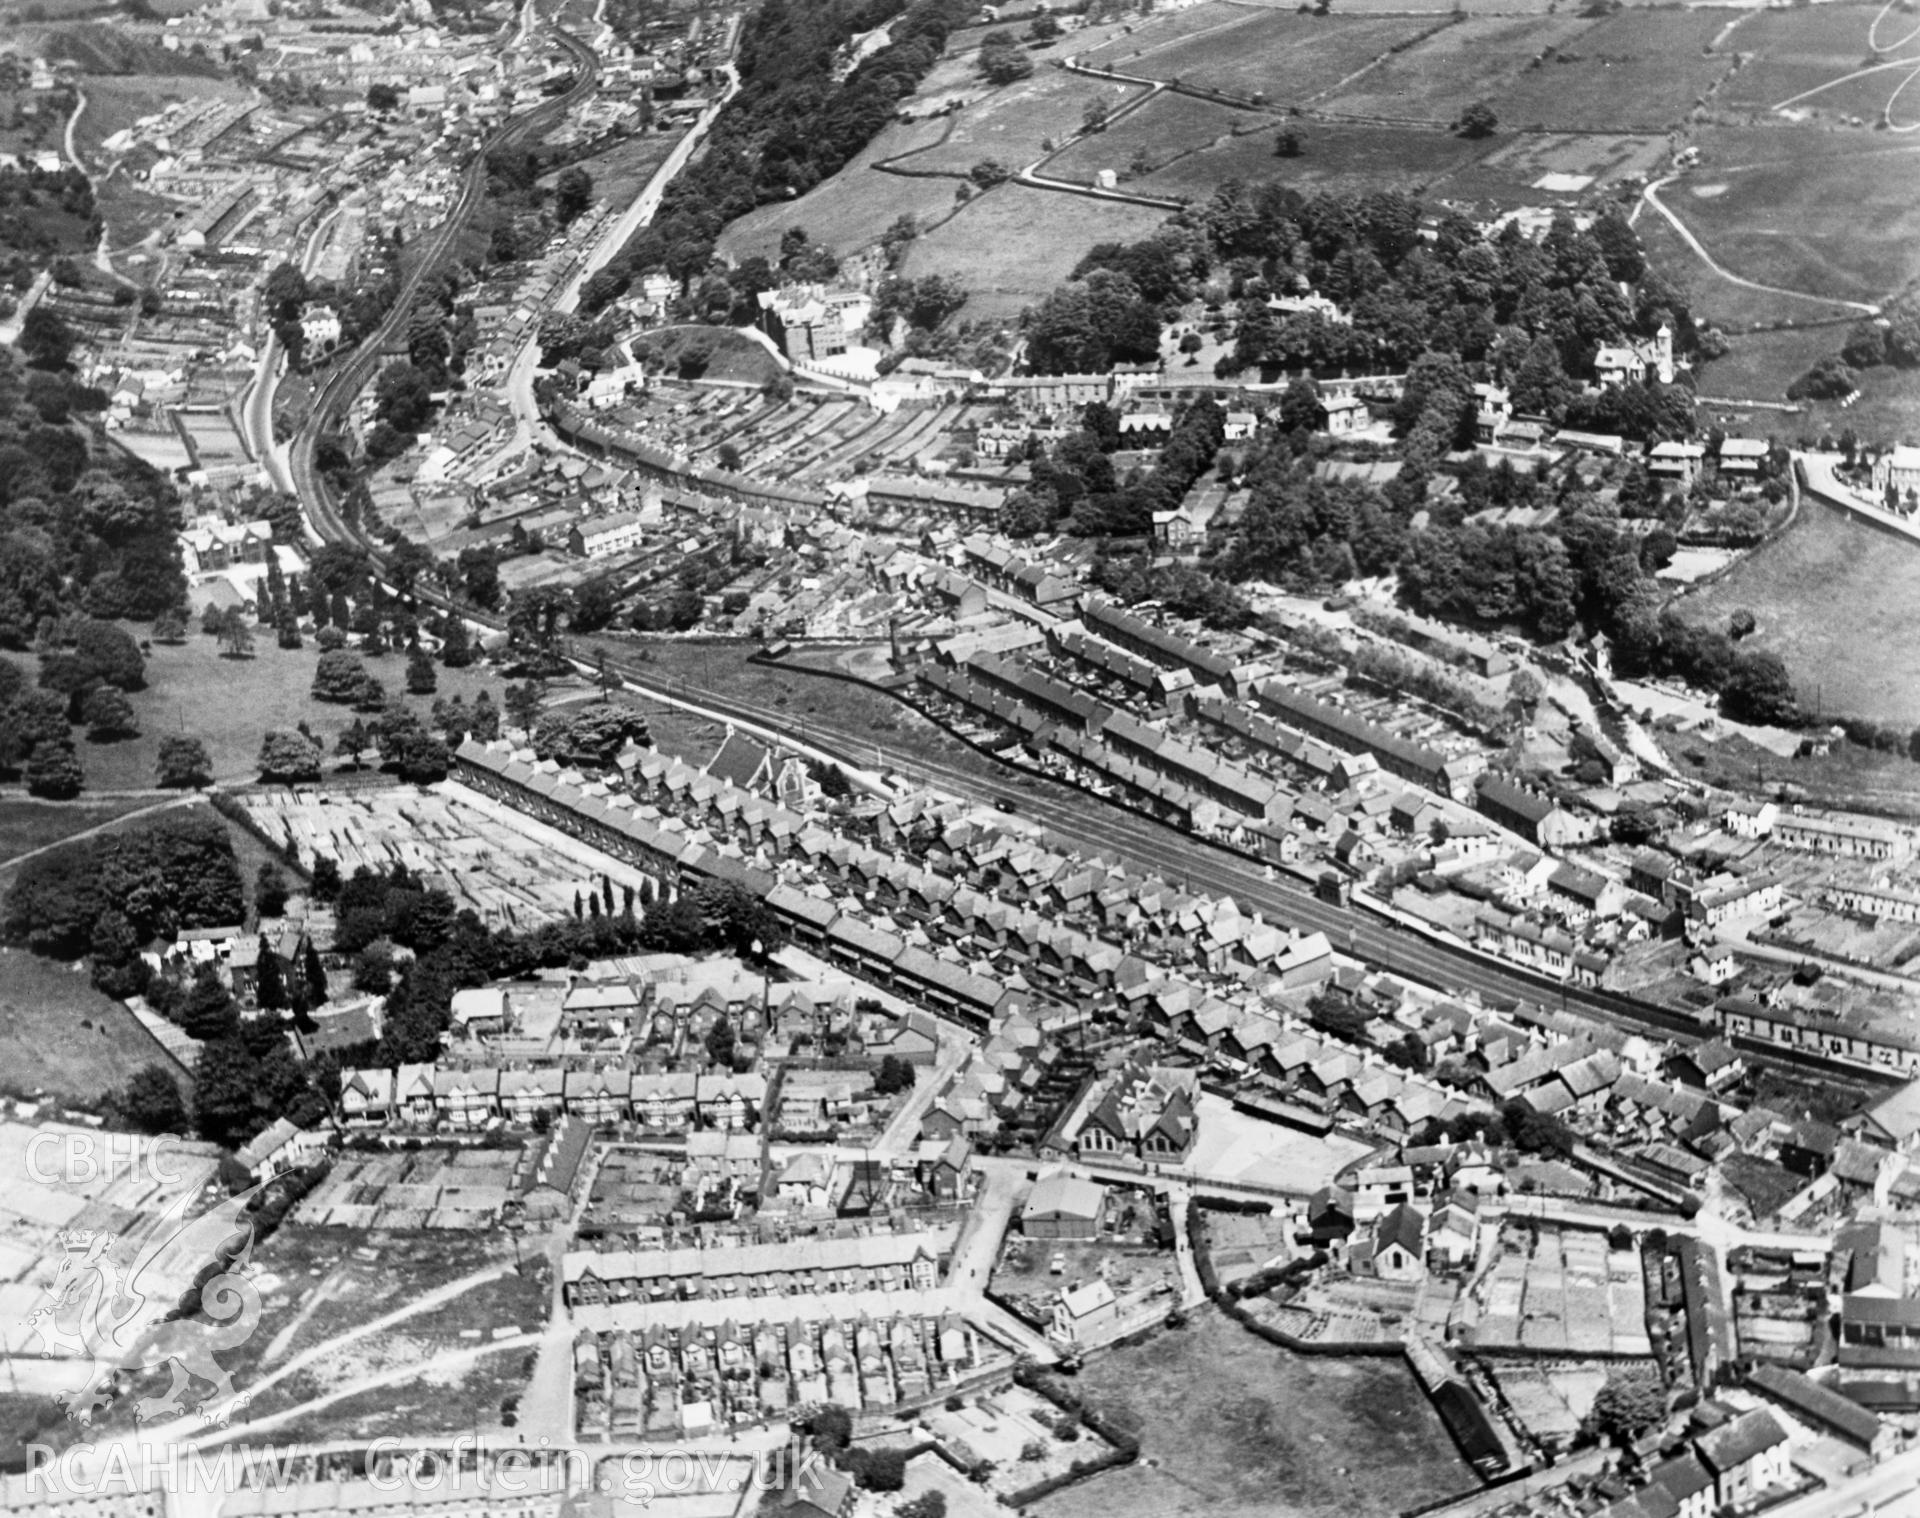 General view of Pontypridd. Oblique aerial photograph, 5?x4? BW glass plate.